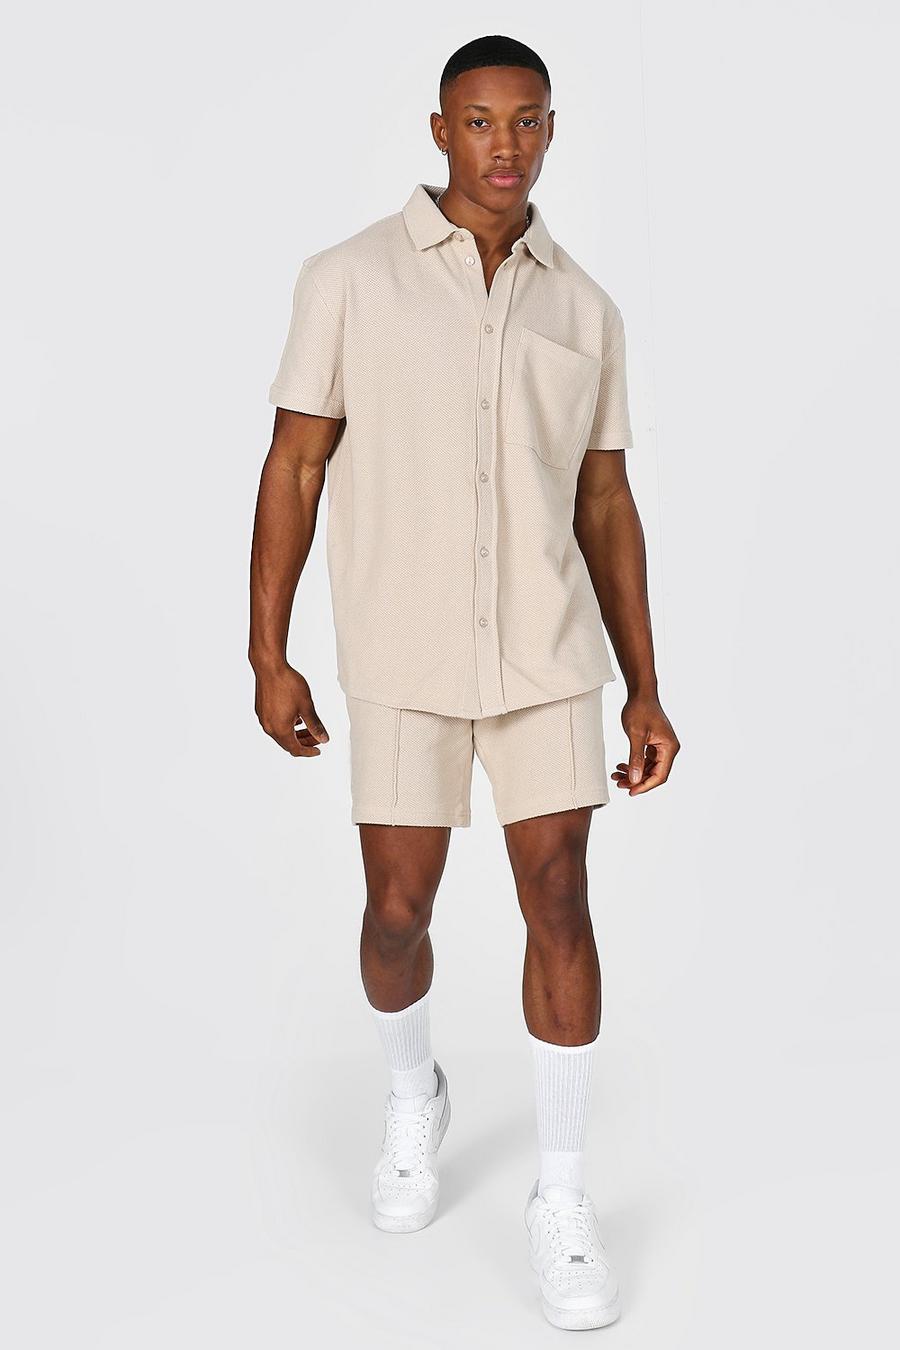 Stone Pique Short Sleeve Shirt And Short image number 1